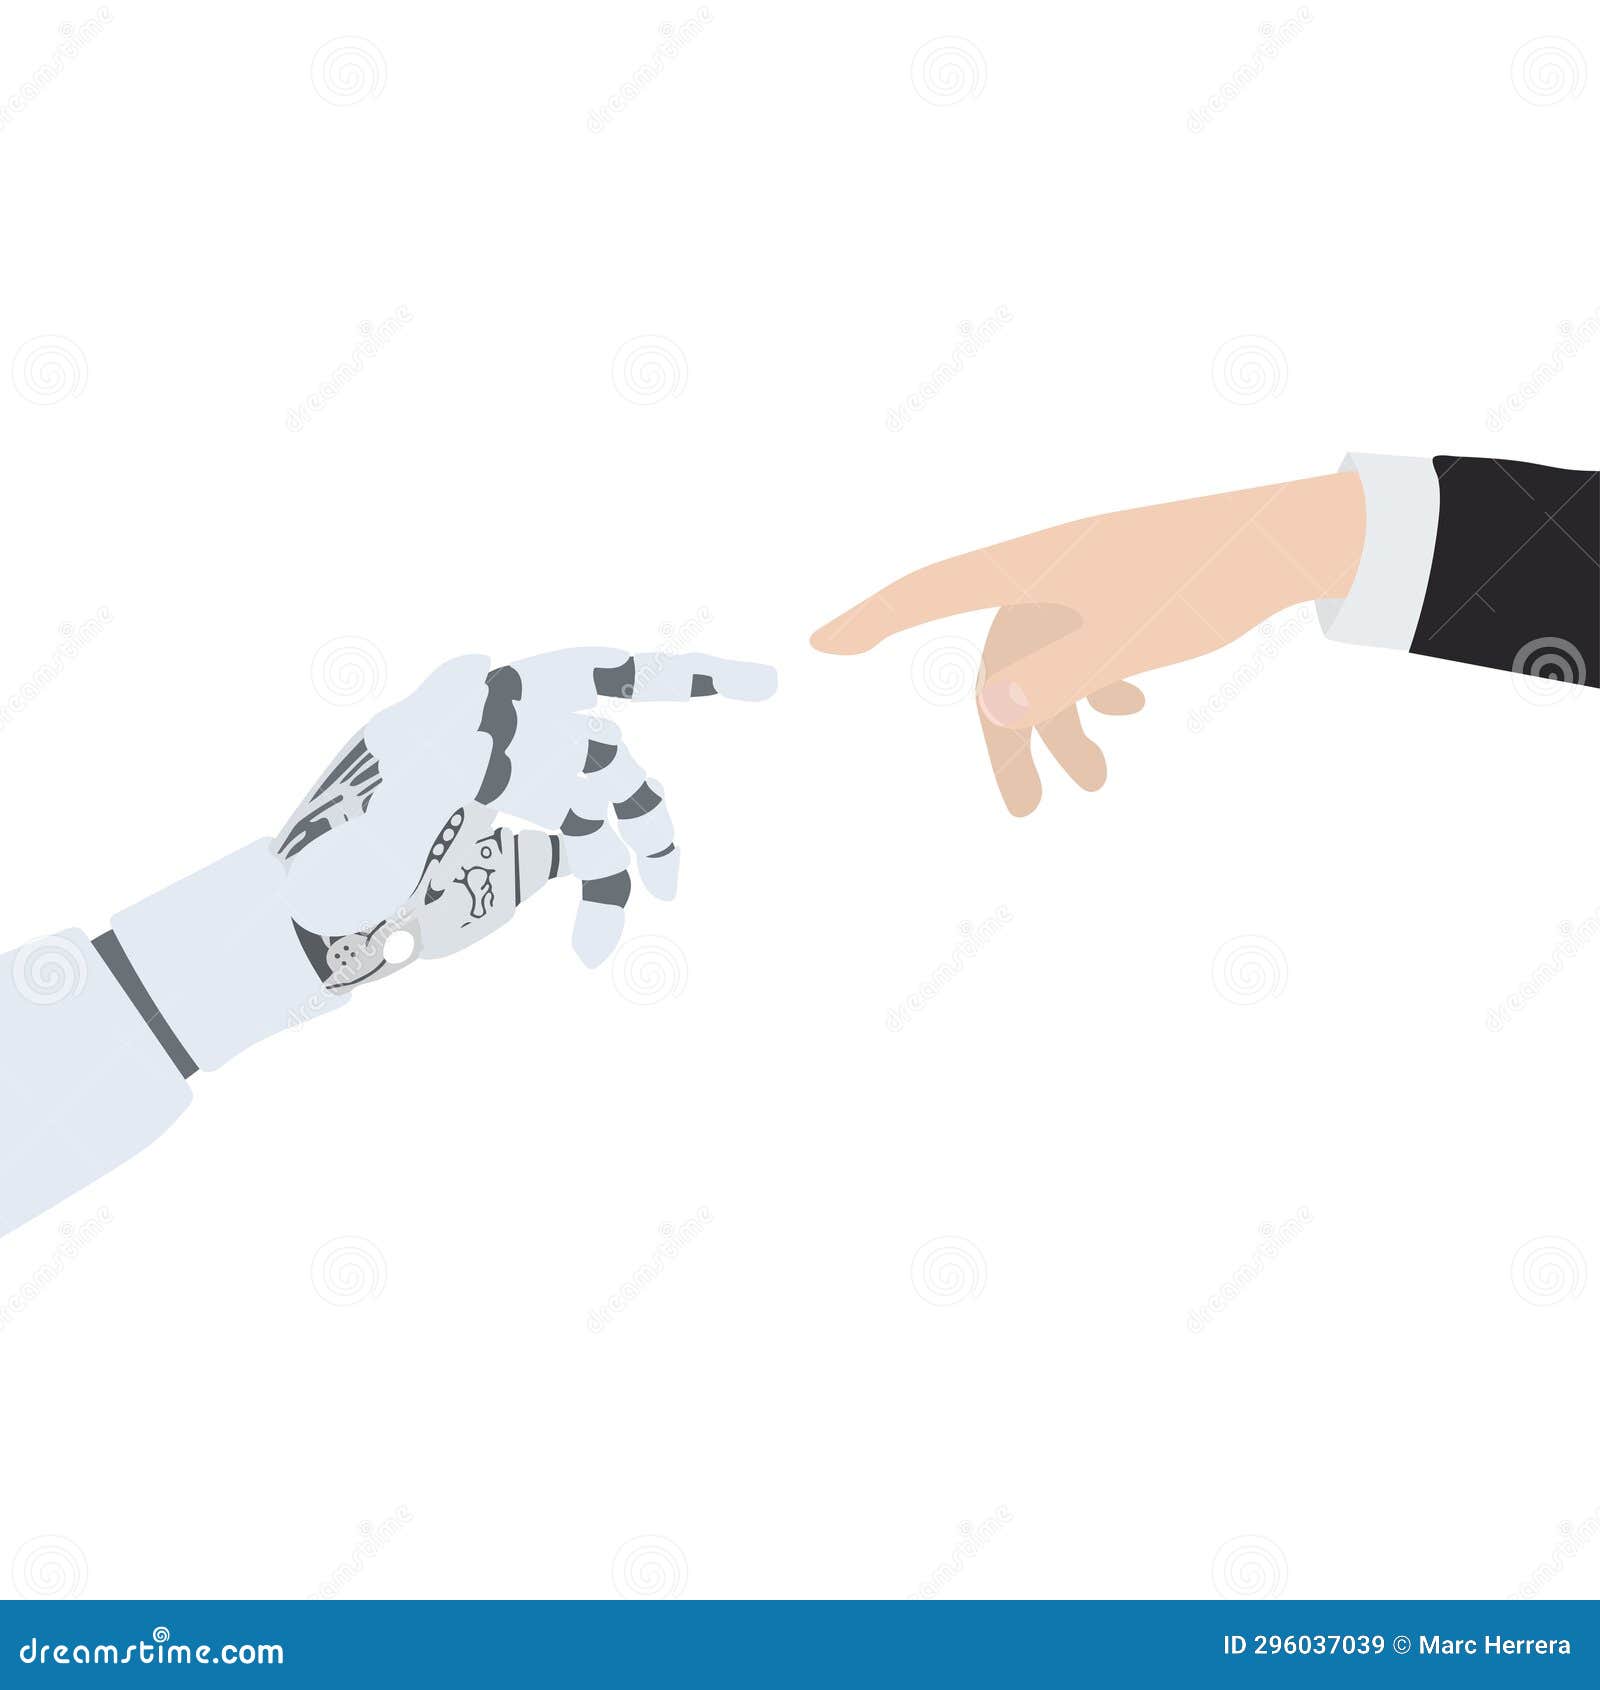 human and artificial intelligence robot hands